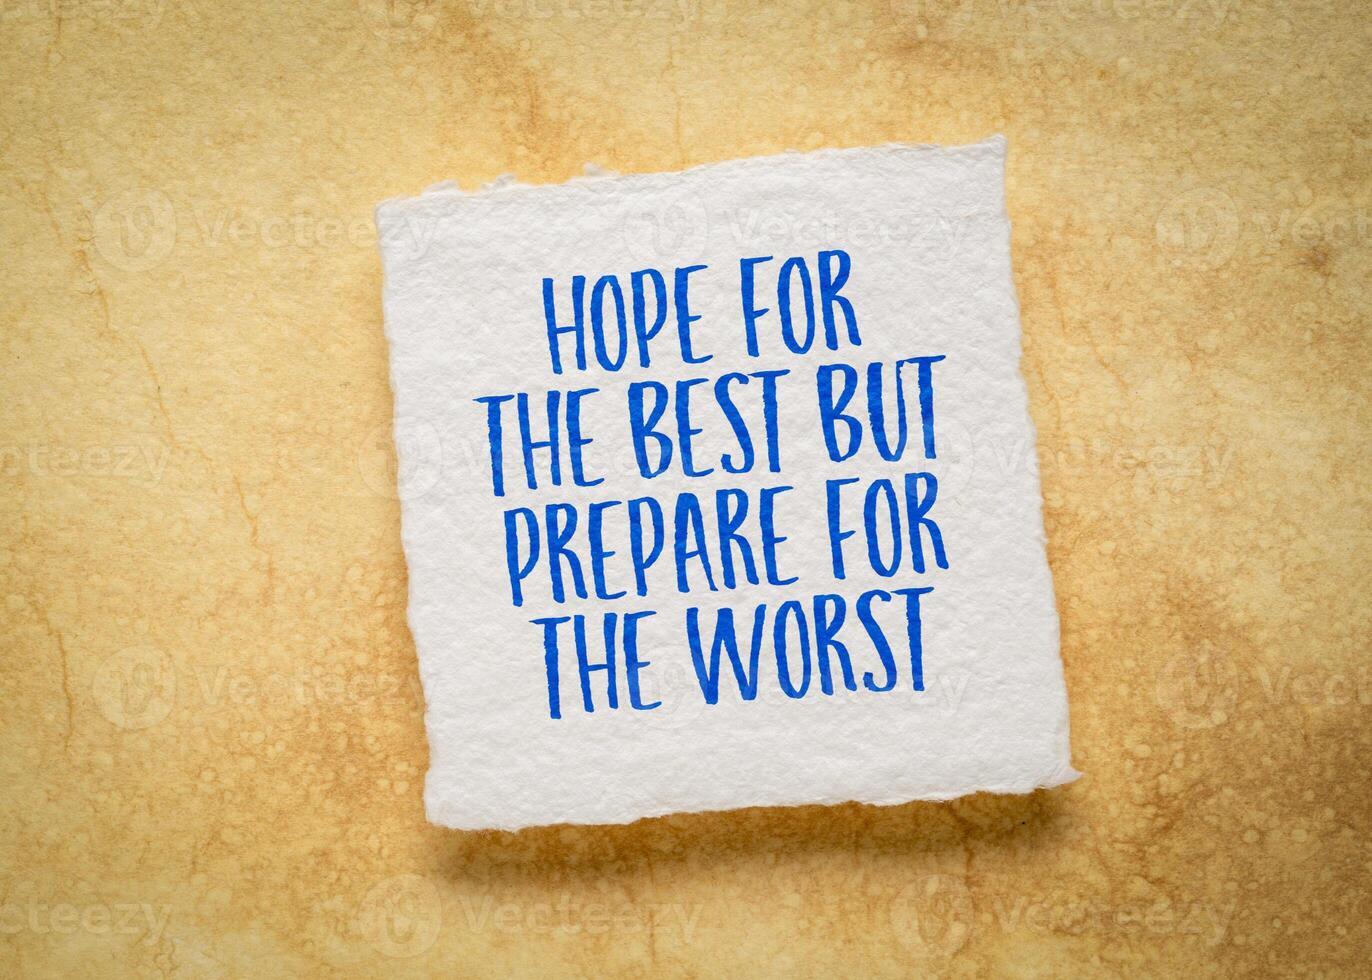 Hope for the best but prepare for the worst - inspirational note on art paper photo